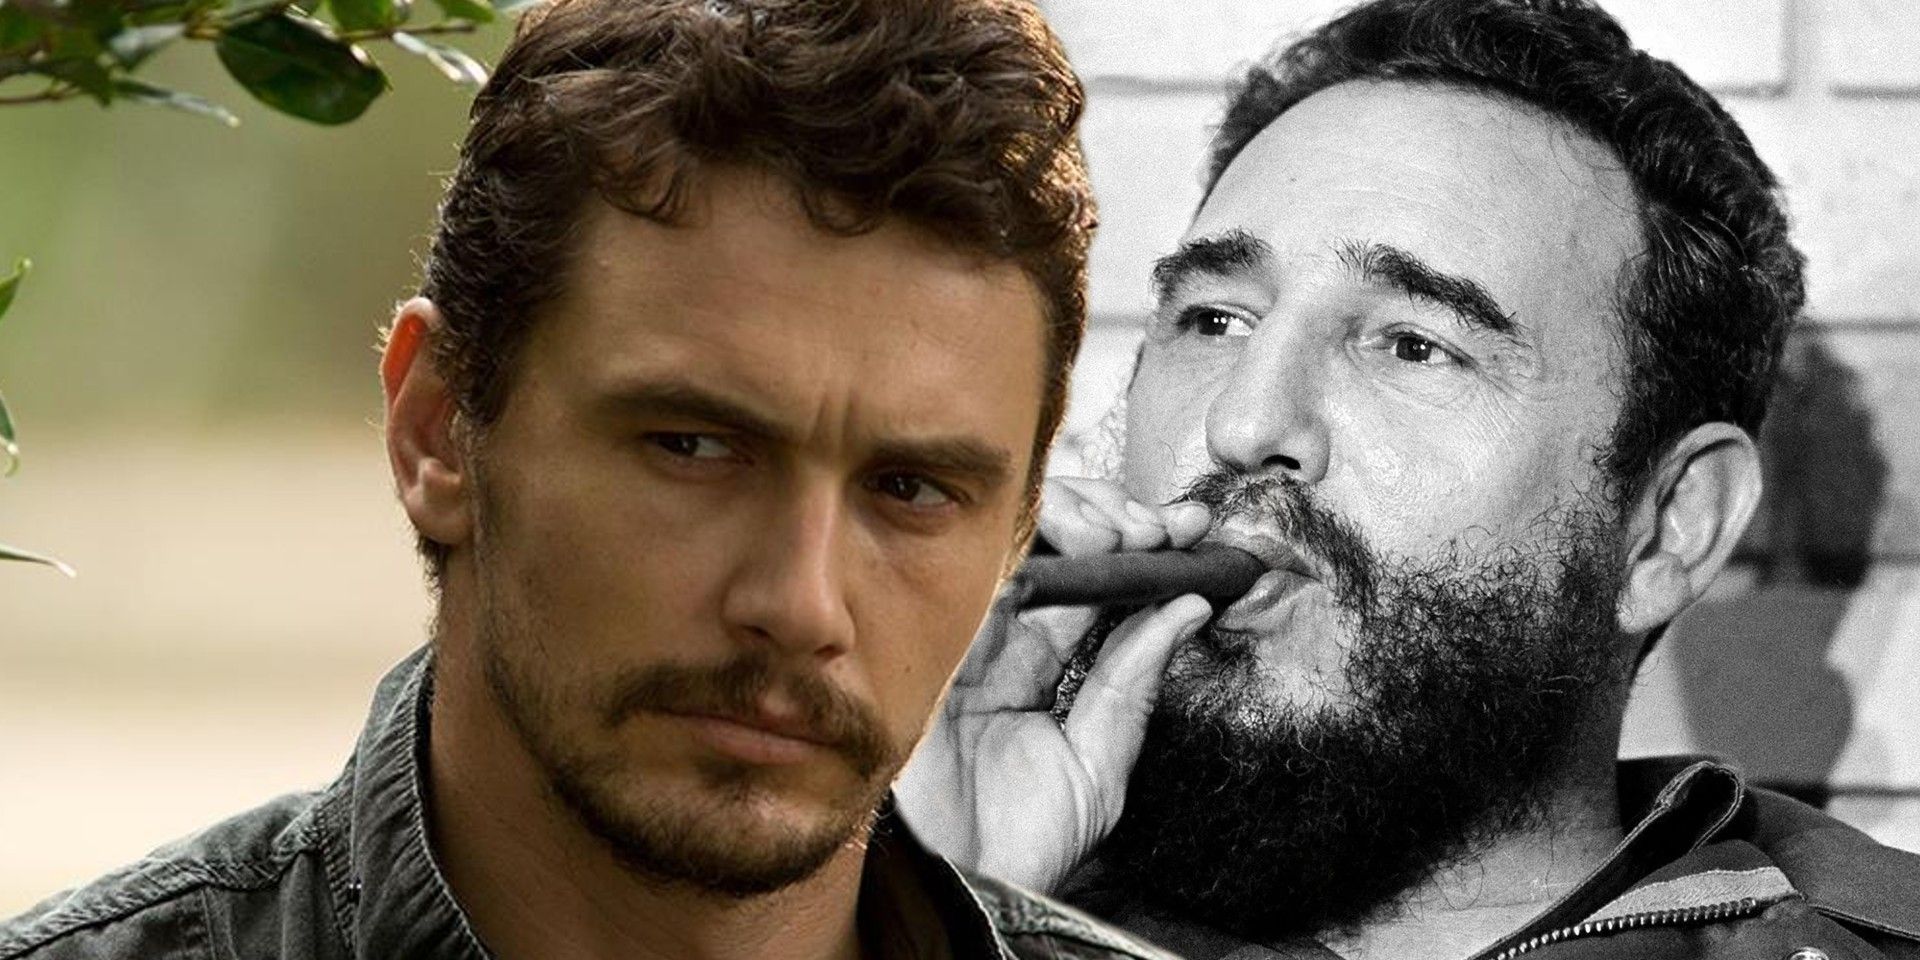 The casting of James Franco as Fidel Castro sparks anger